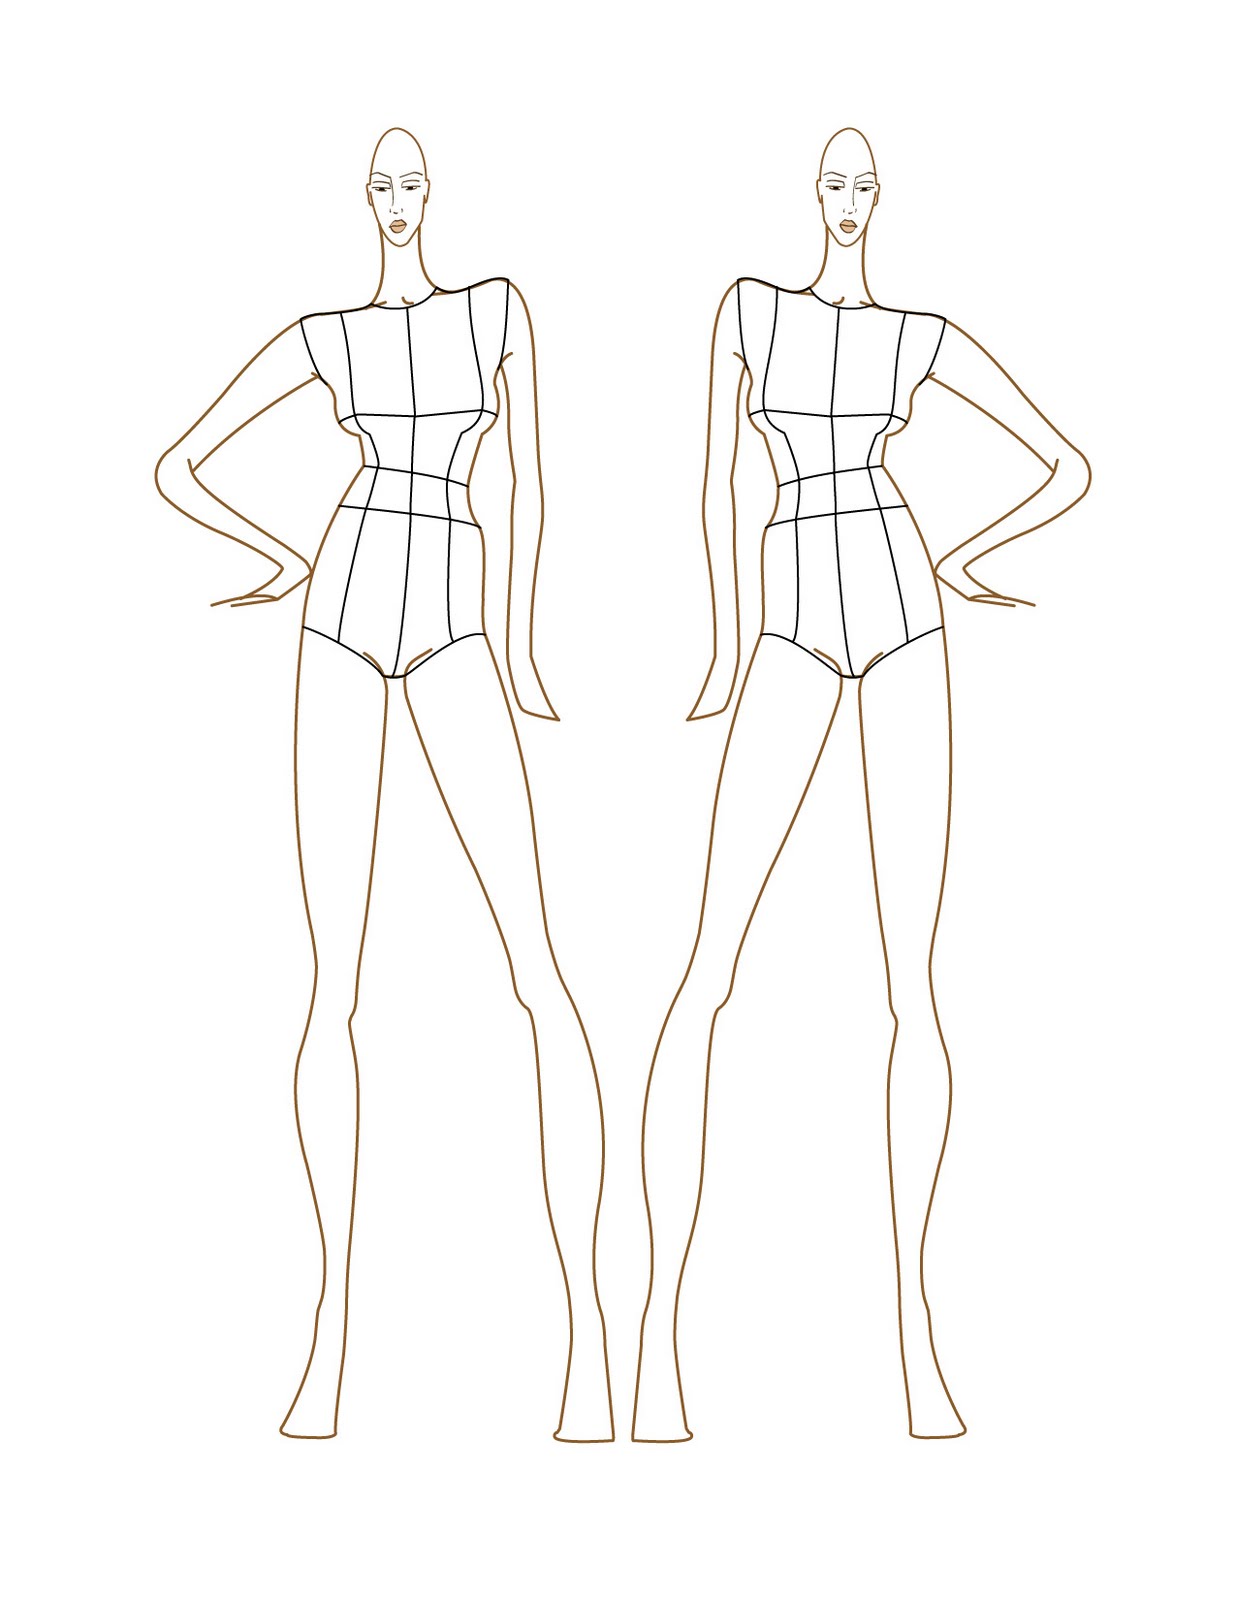 Costume Sketch Template At PaintingValley Explore Collection Of Costume Sketch Template